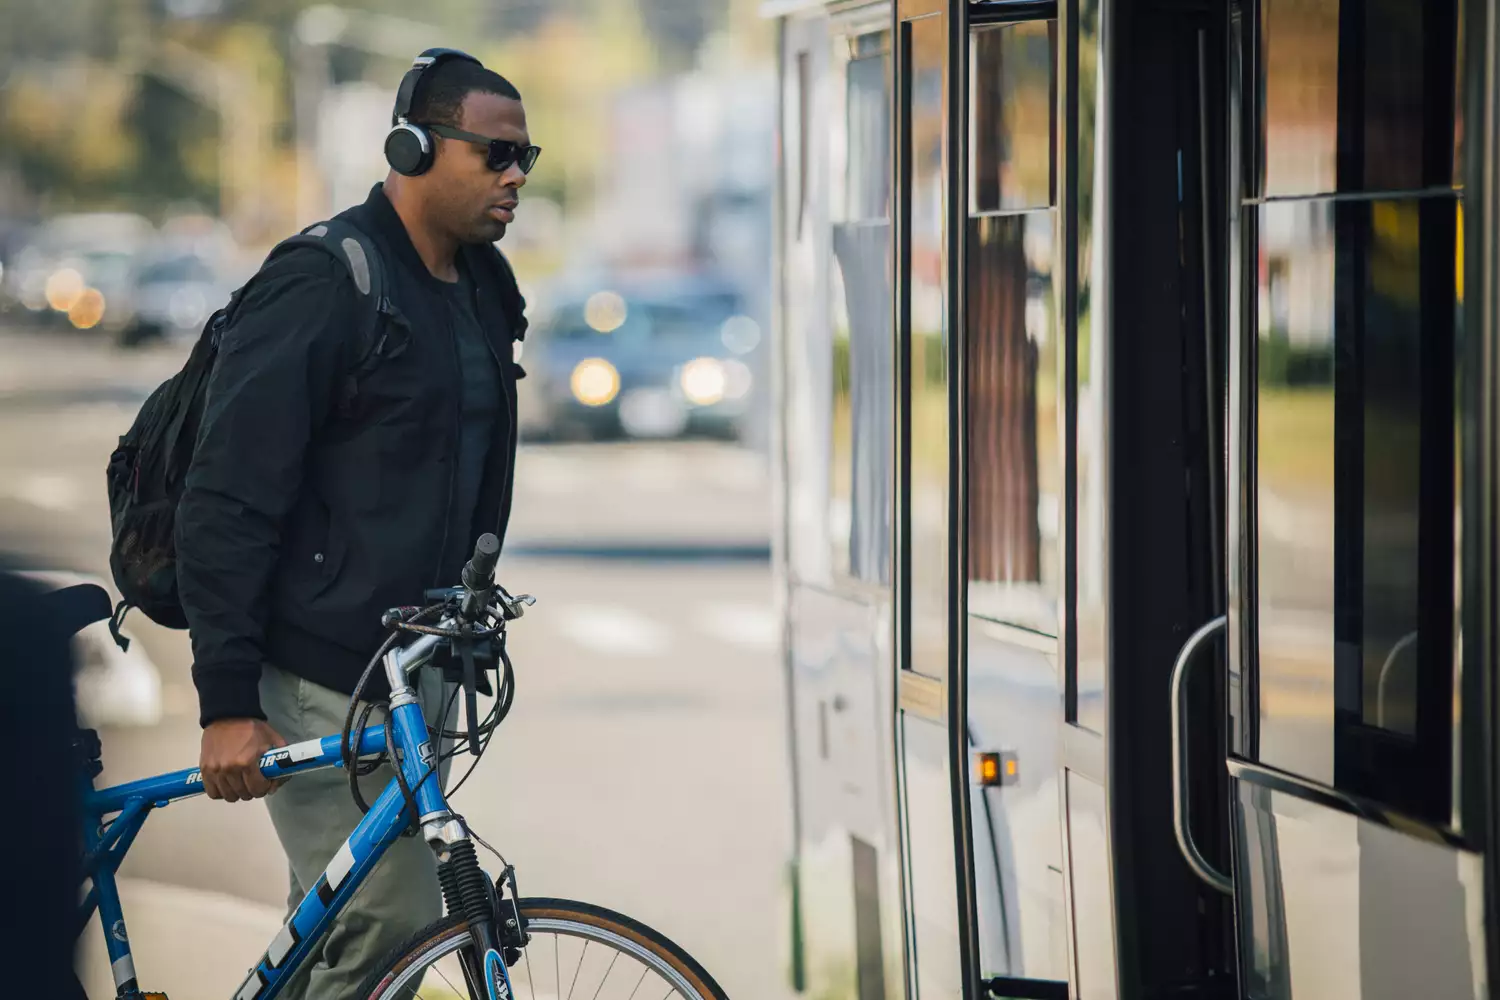 A man boards a bus with his bike.